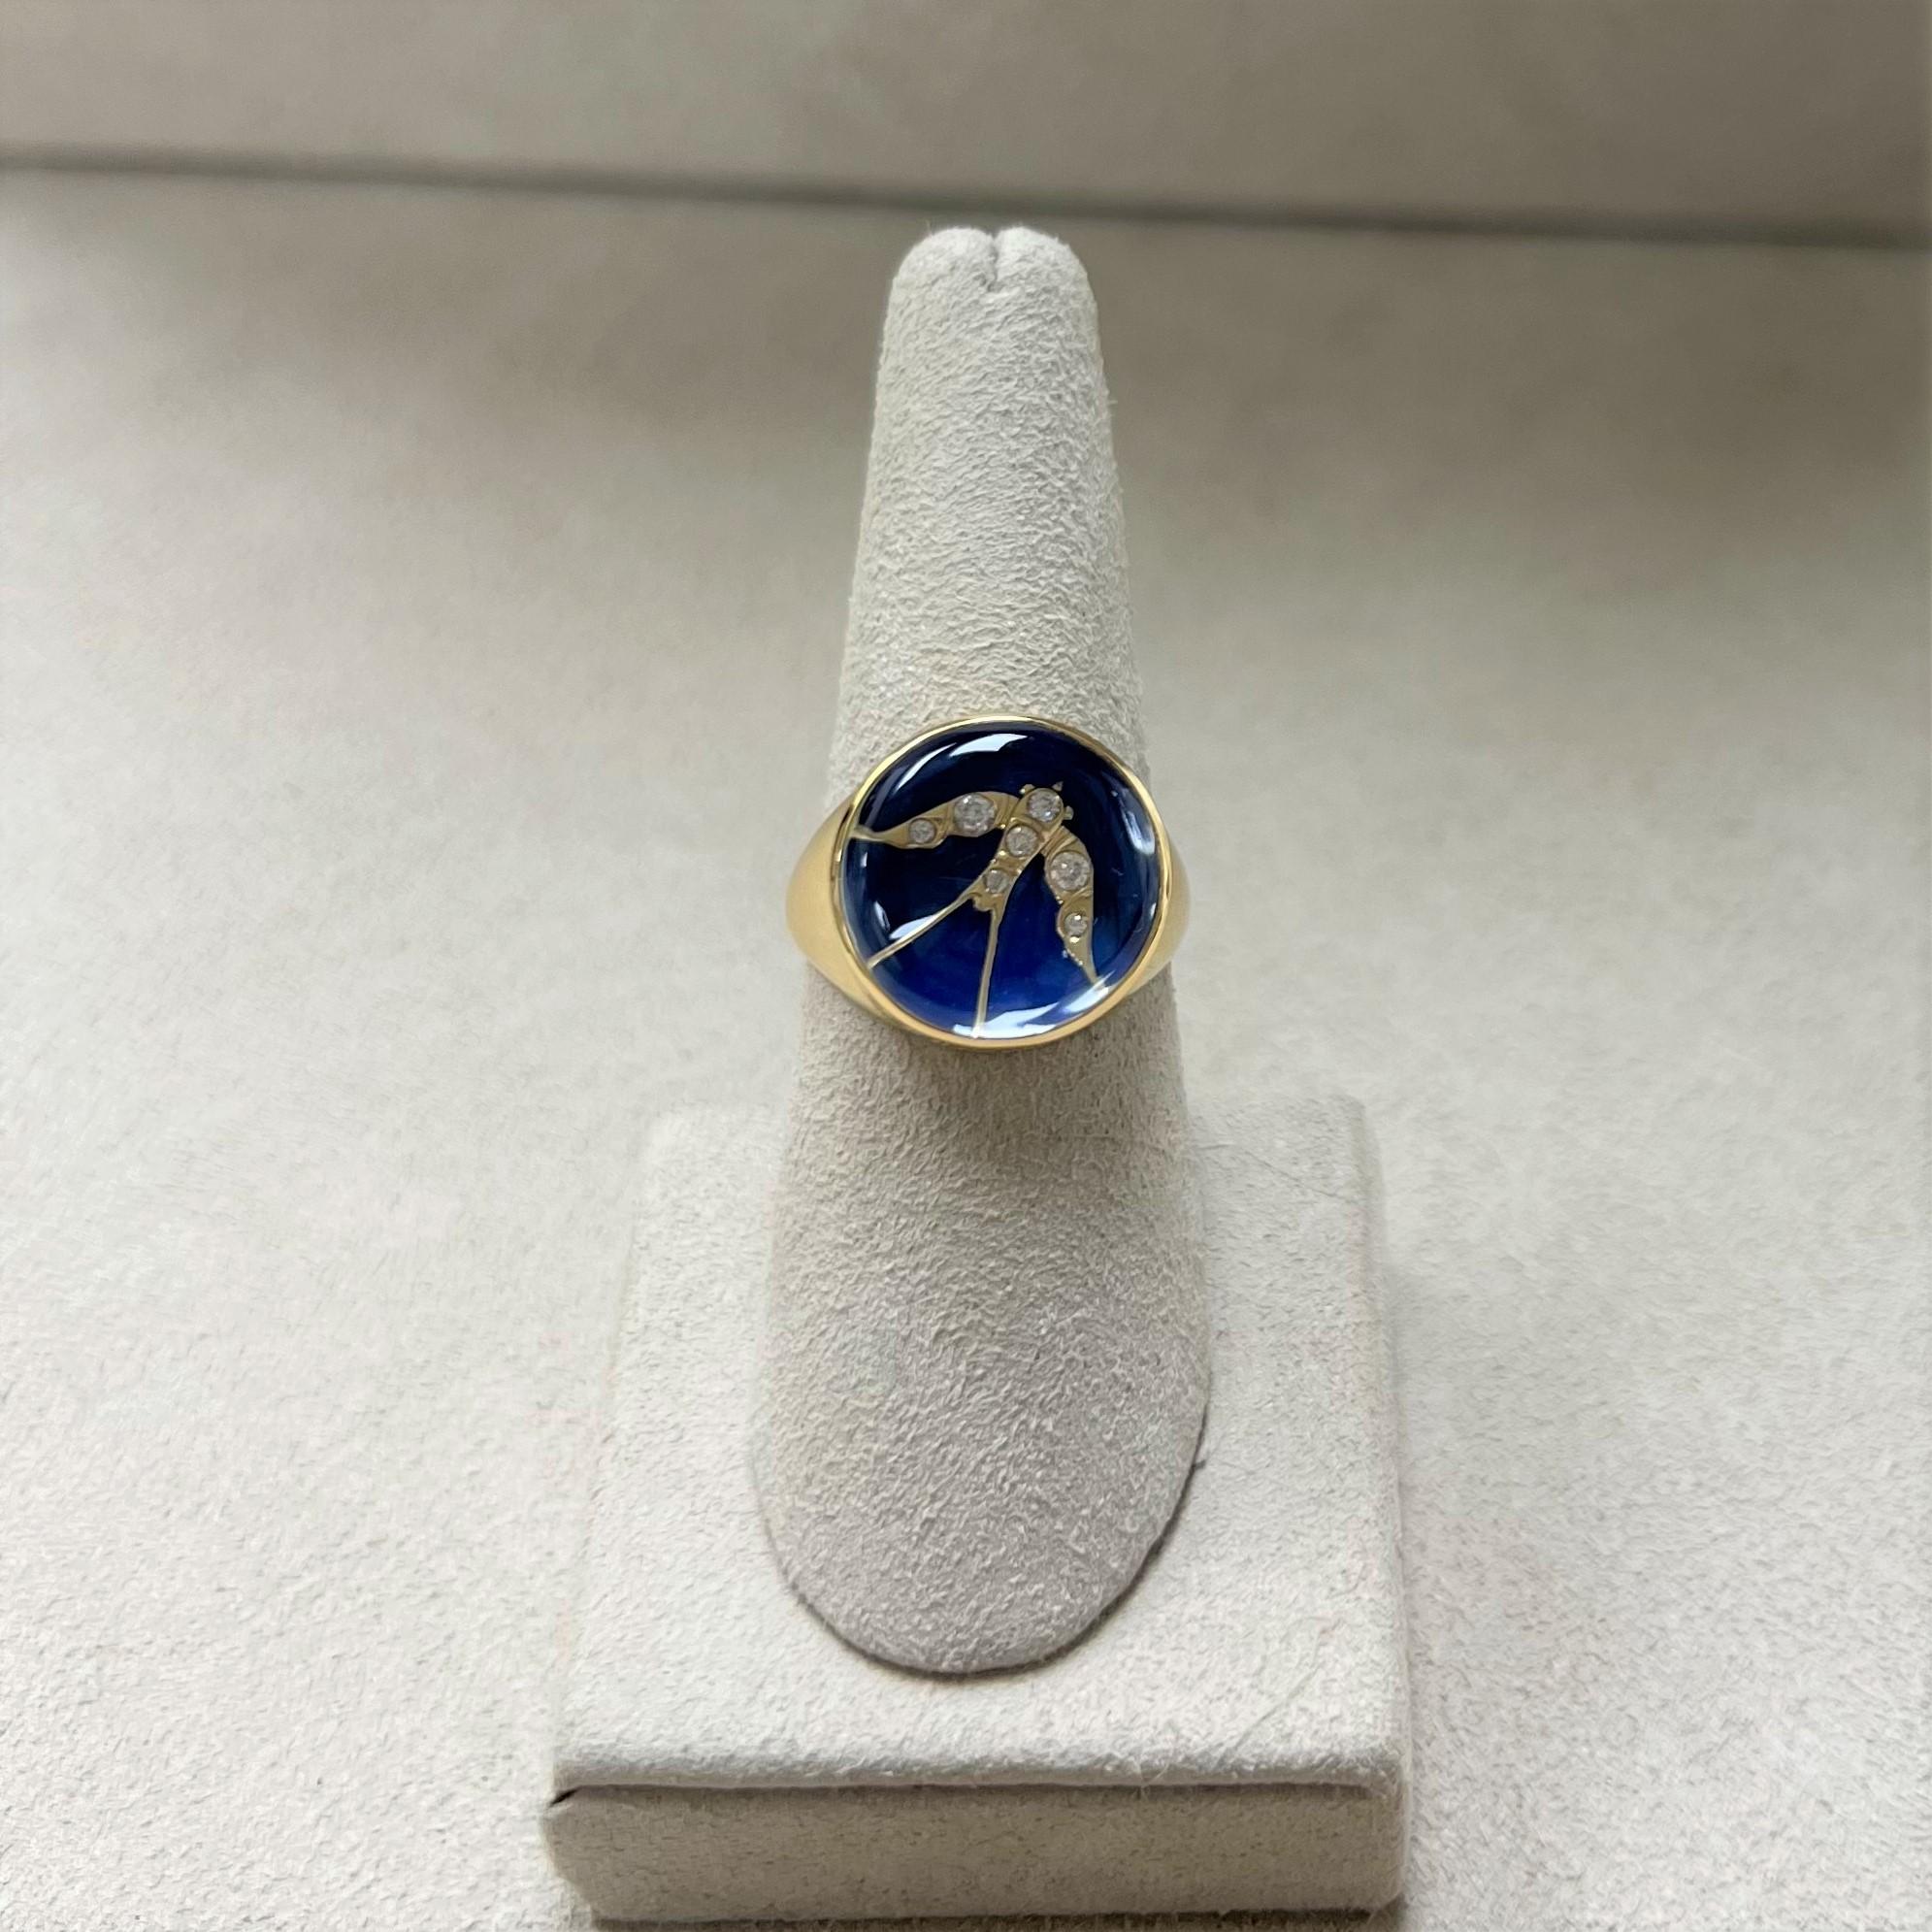 Created in 18 karat yellow gold
Rock crystal 10 carats approx.
Diamonds 0.35 carat approx.
Lapis blue enamel details
Ring size US 7, can be sized as per request
Limited edition

Crafted in 18-karat yellow gold and graced with rock crystal and